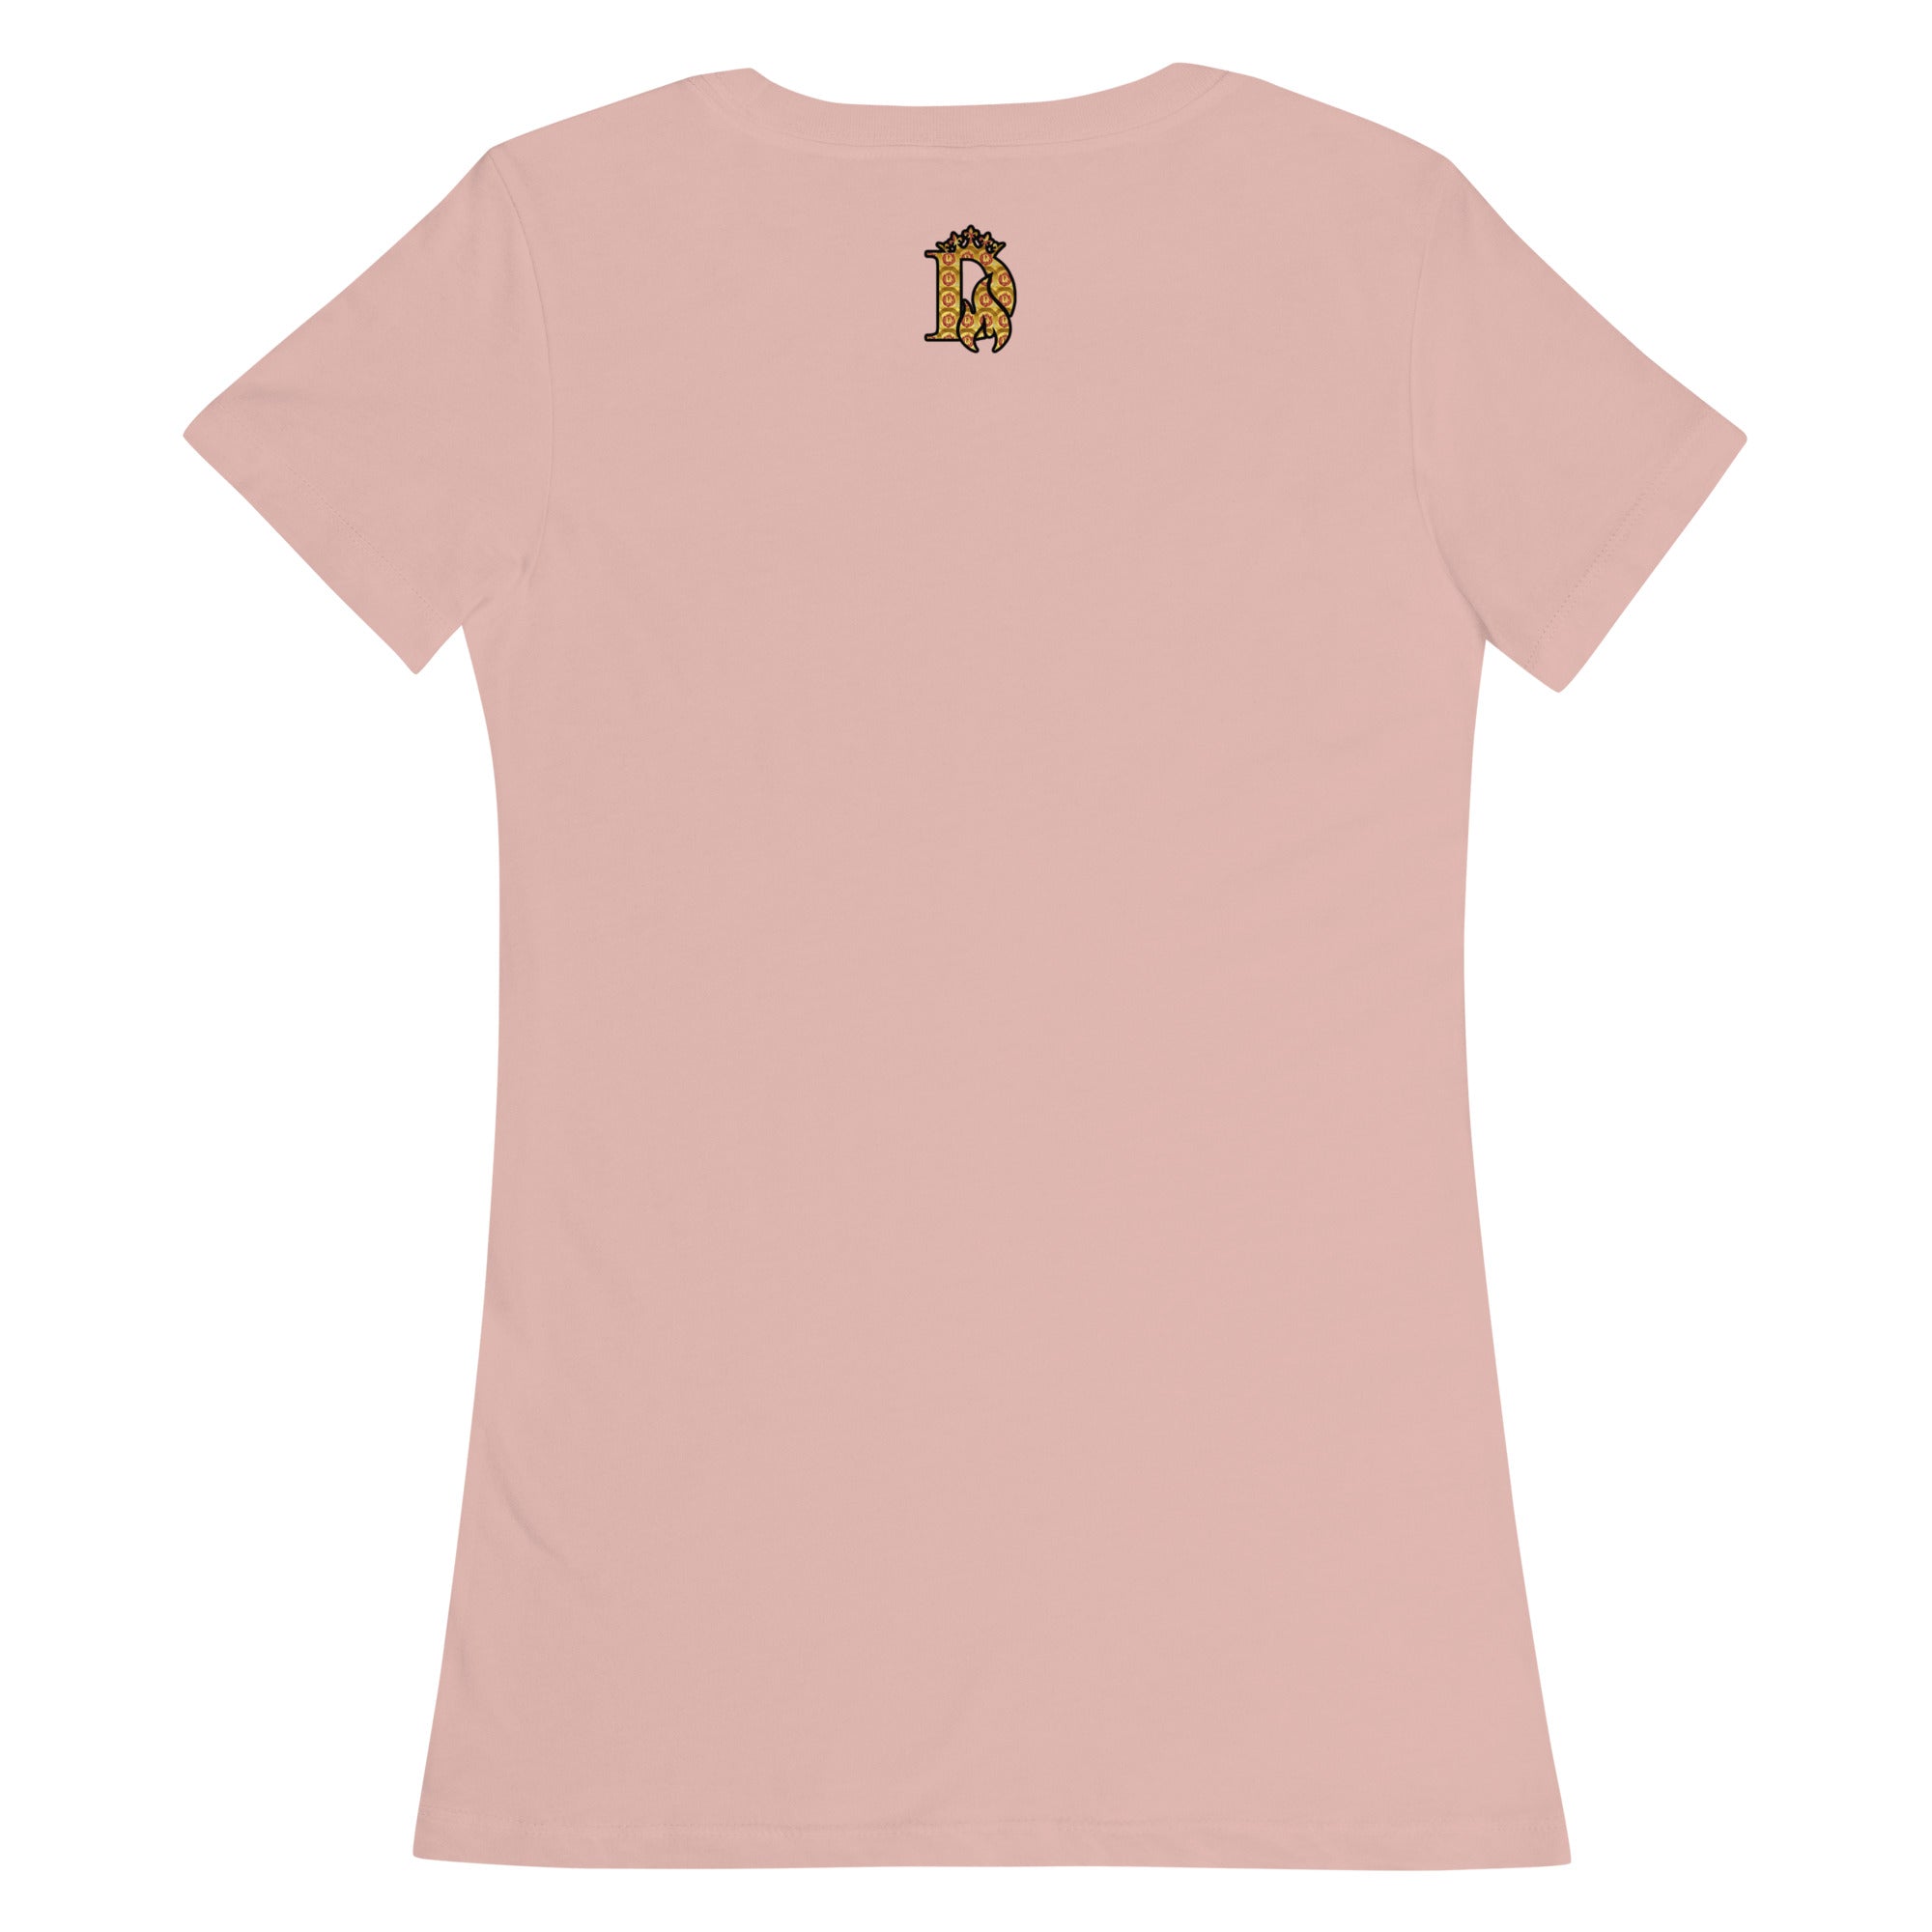 Women’s fitted Hustle Babe Pink Tee